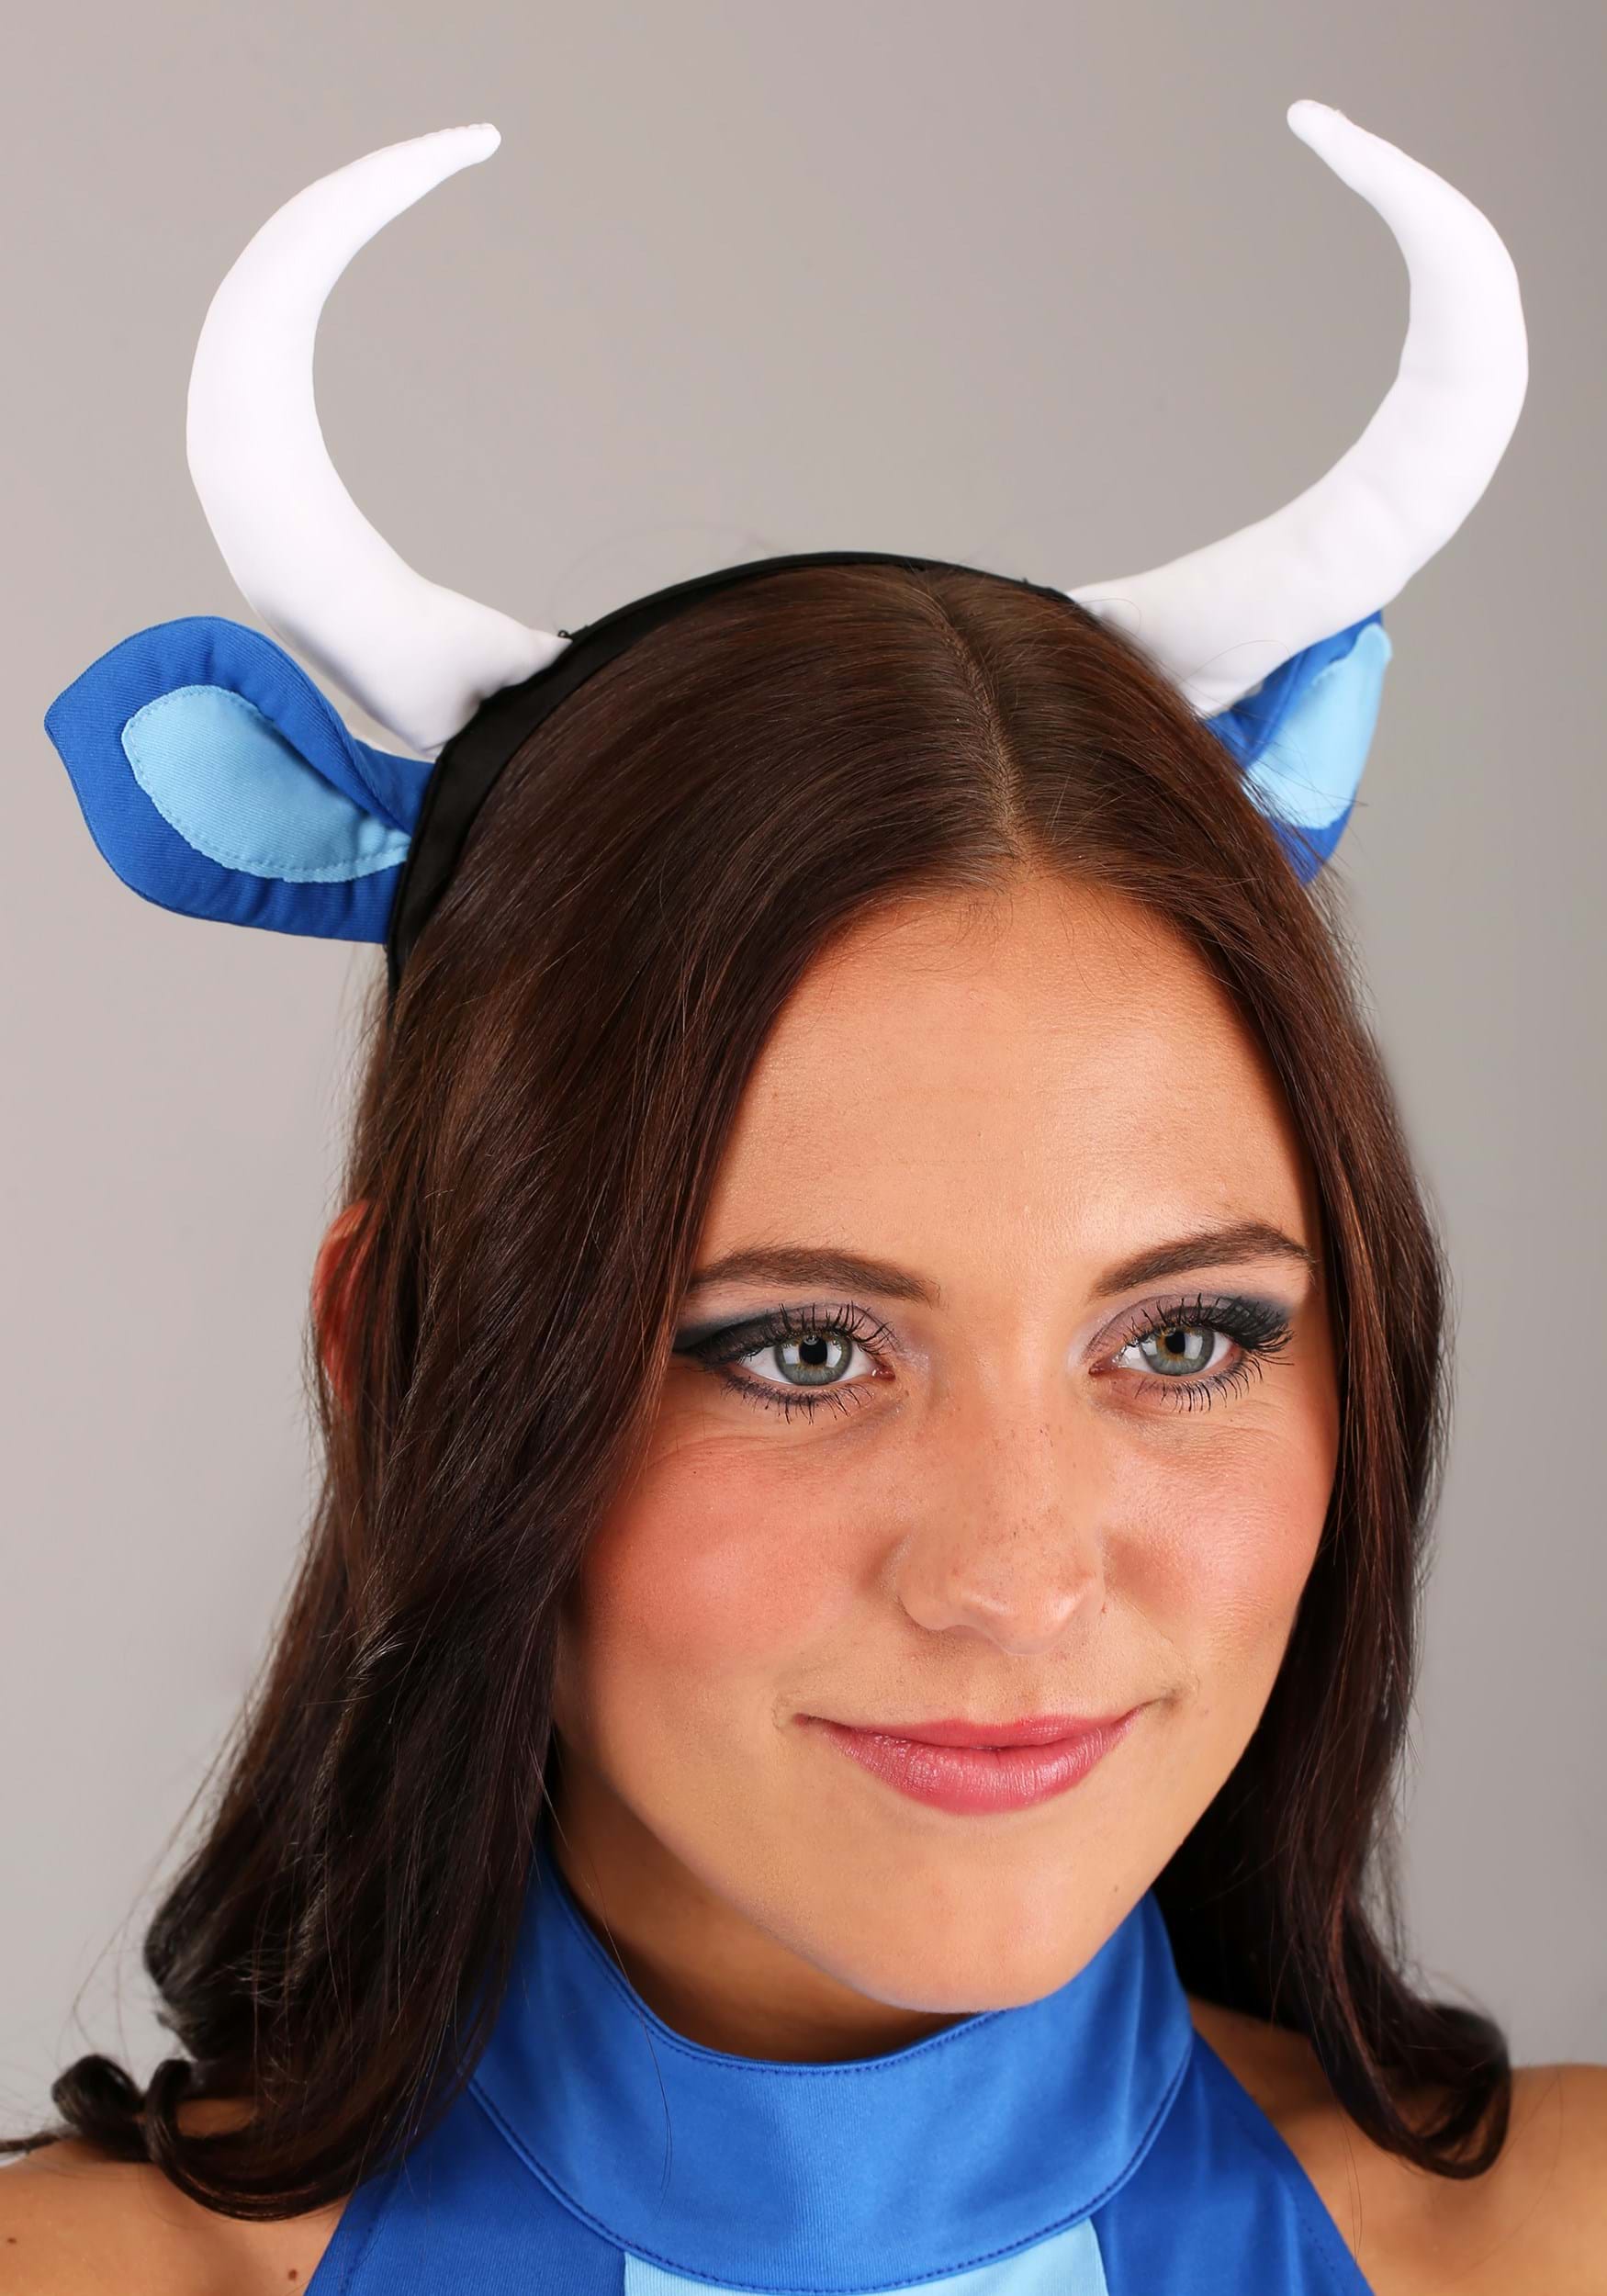 Babe The Blue Ox Costume , Women's Storybook Costumes